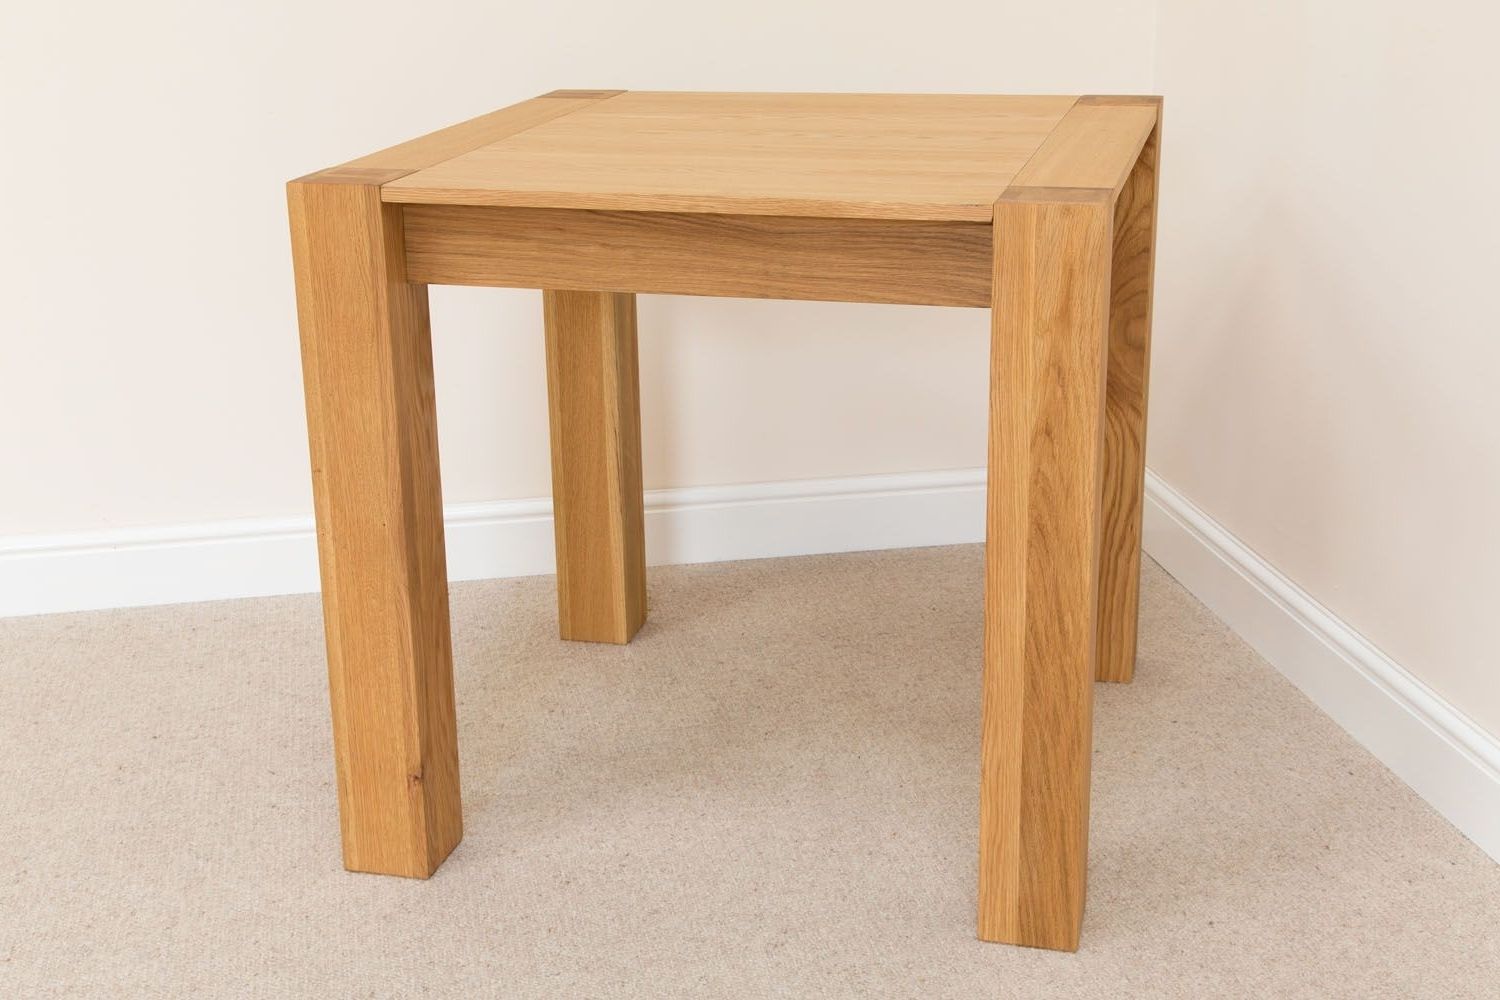 Cambridge Small Square Oak Kitchen Table 80cm X 80cm Pertaining To Most Up To Date Square Oak Dining Tables (View 18 of 25)